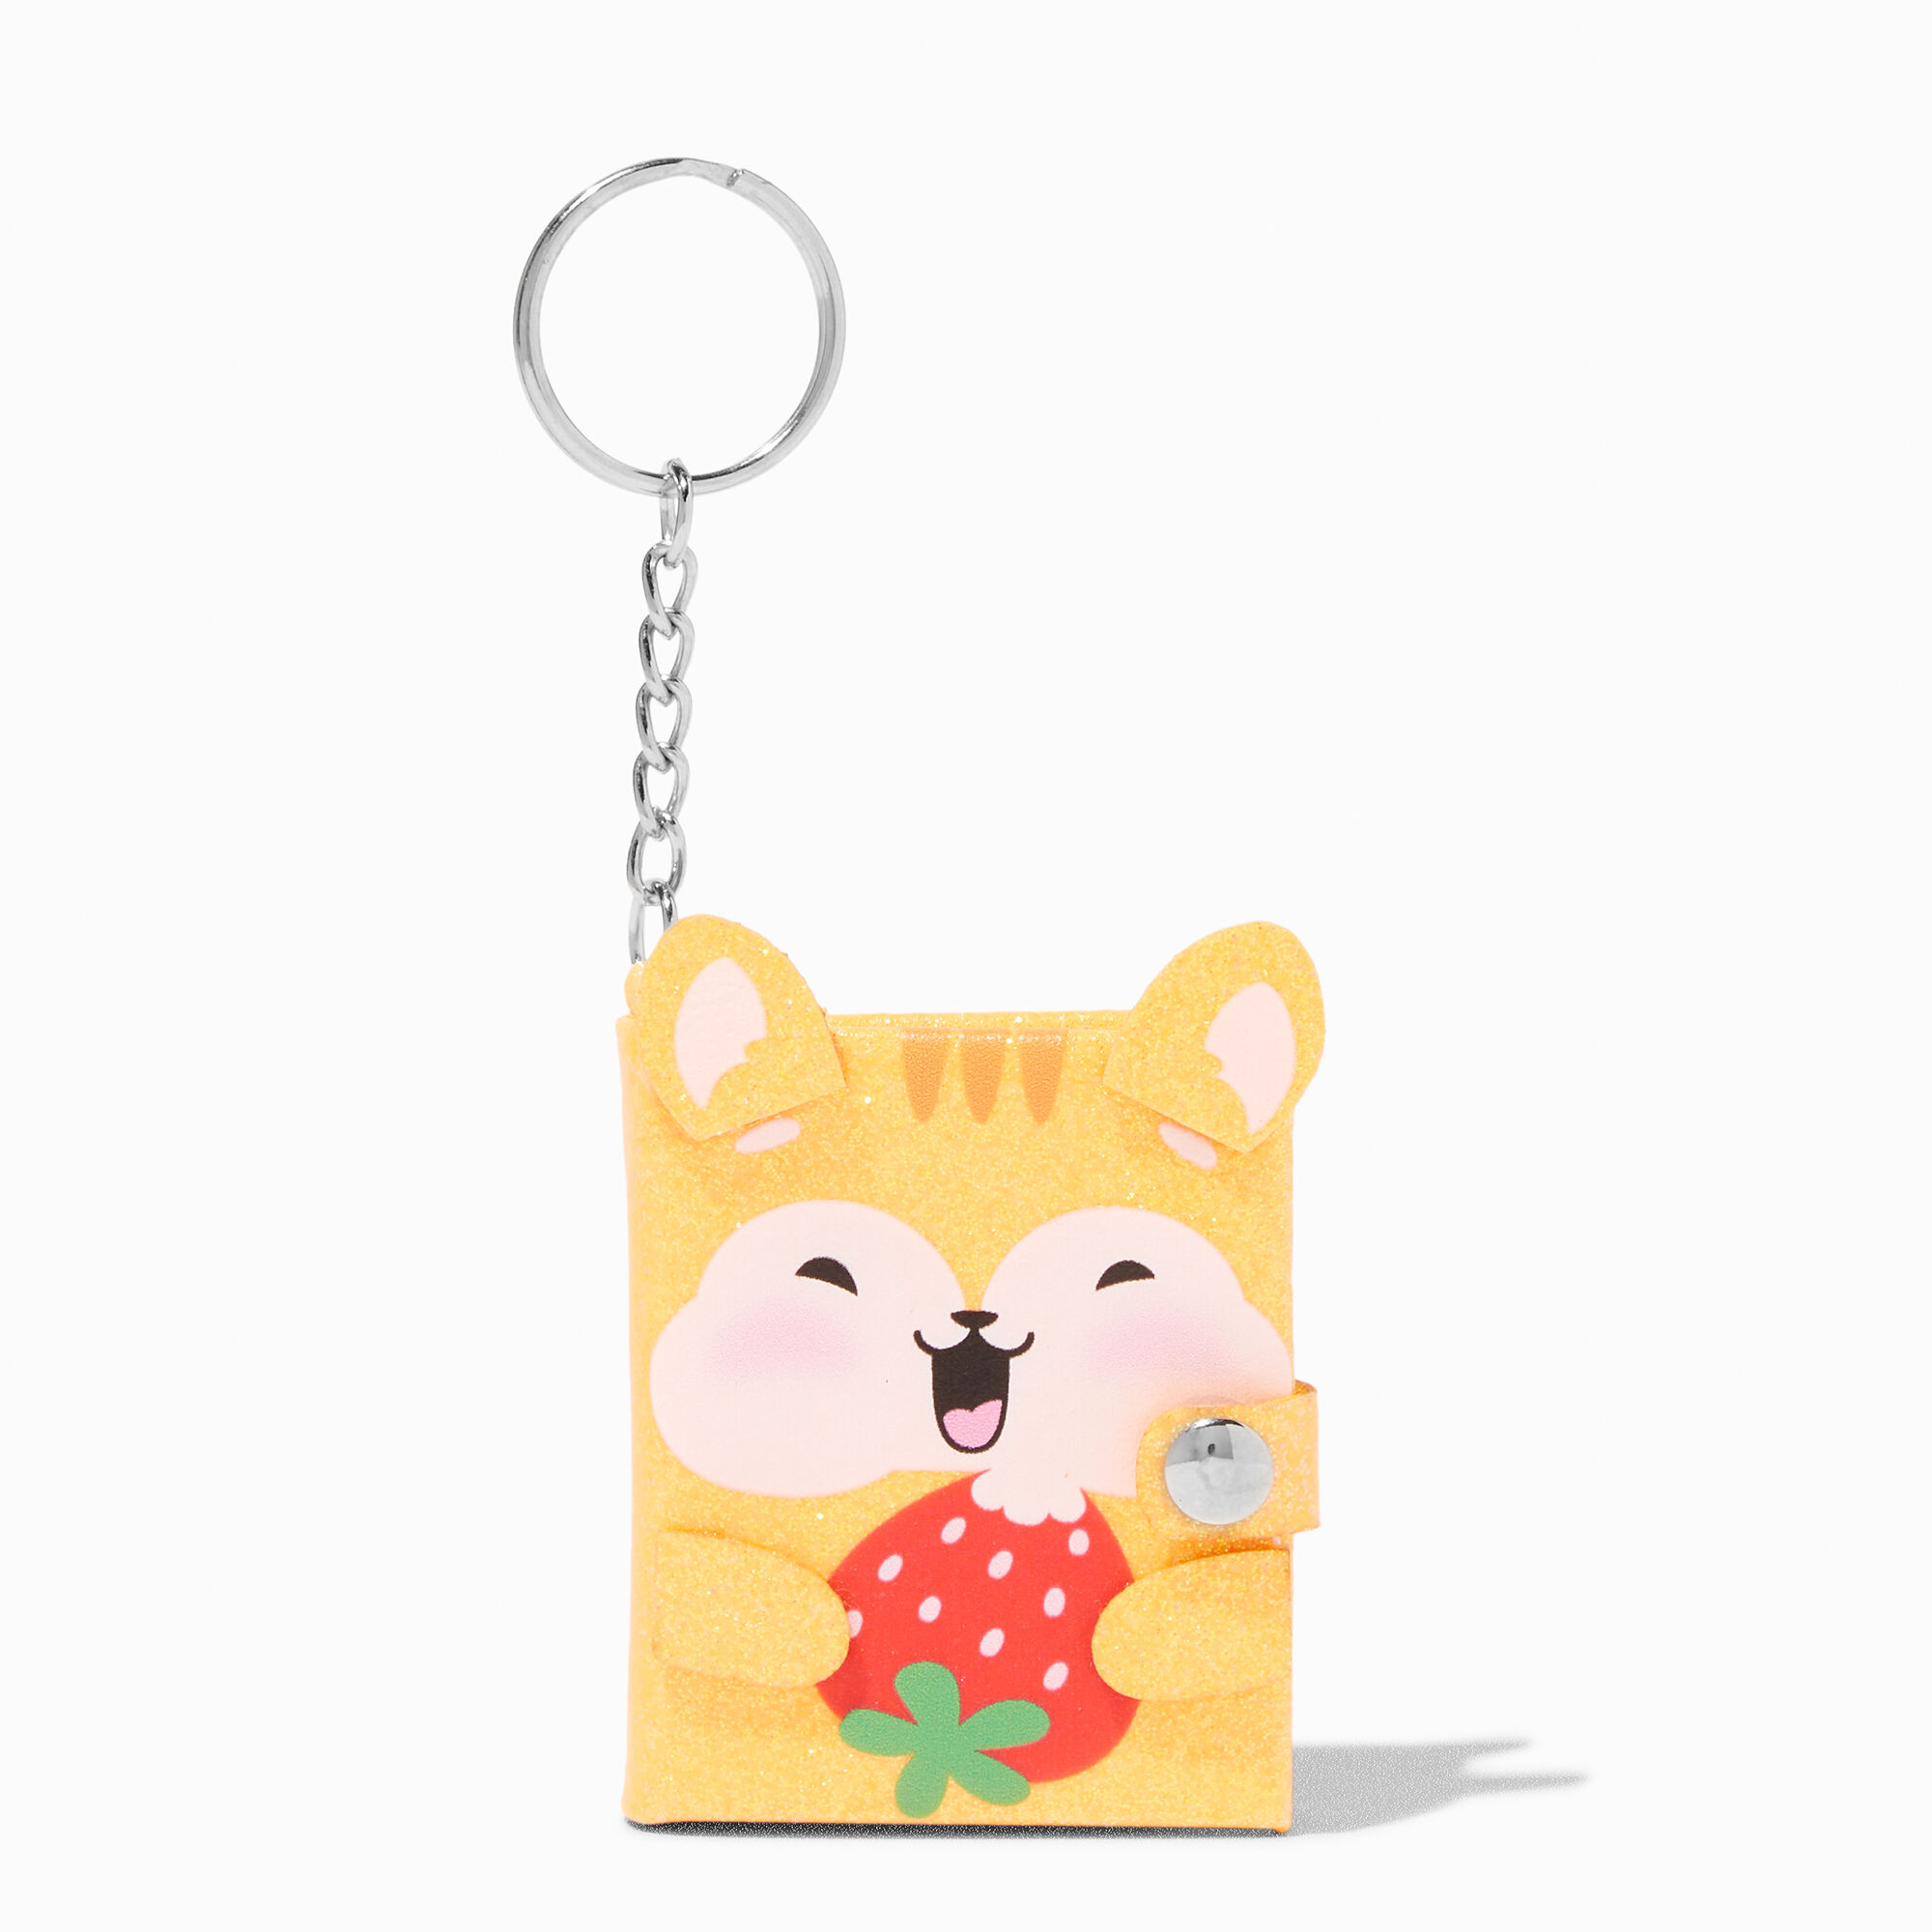 View Claires Strawberry Hamster Glitter Mini Diary Keyring information